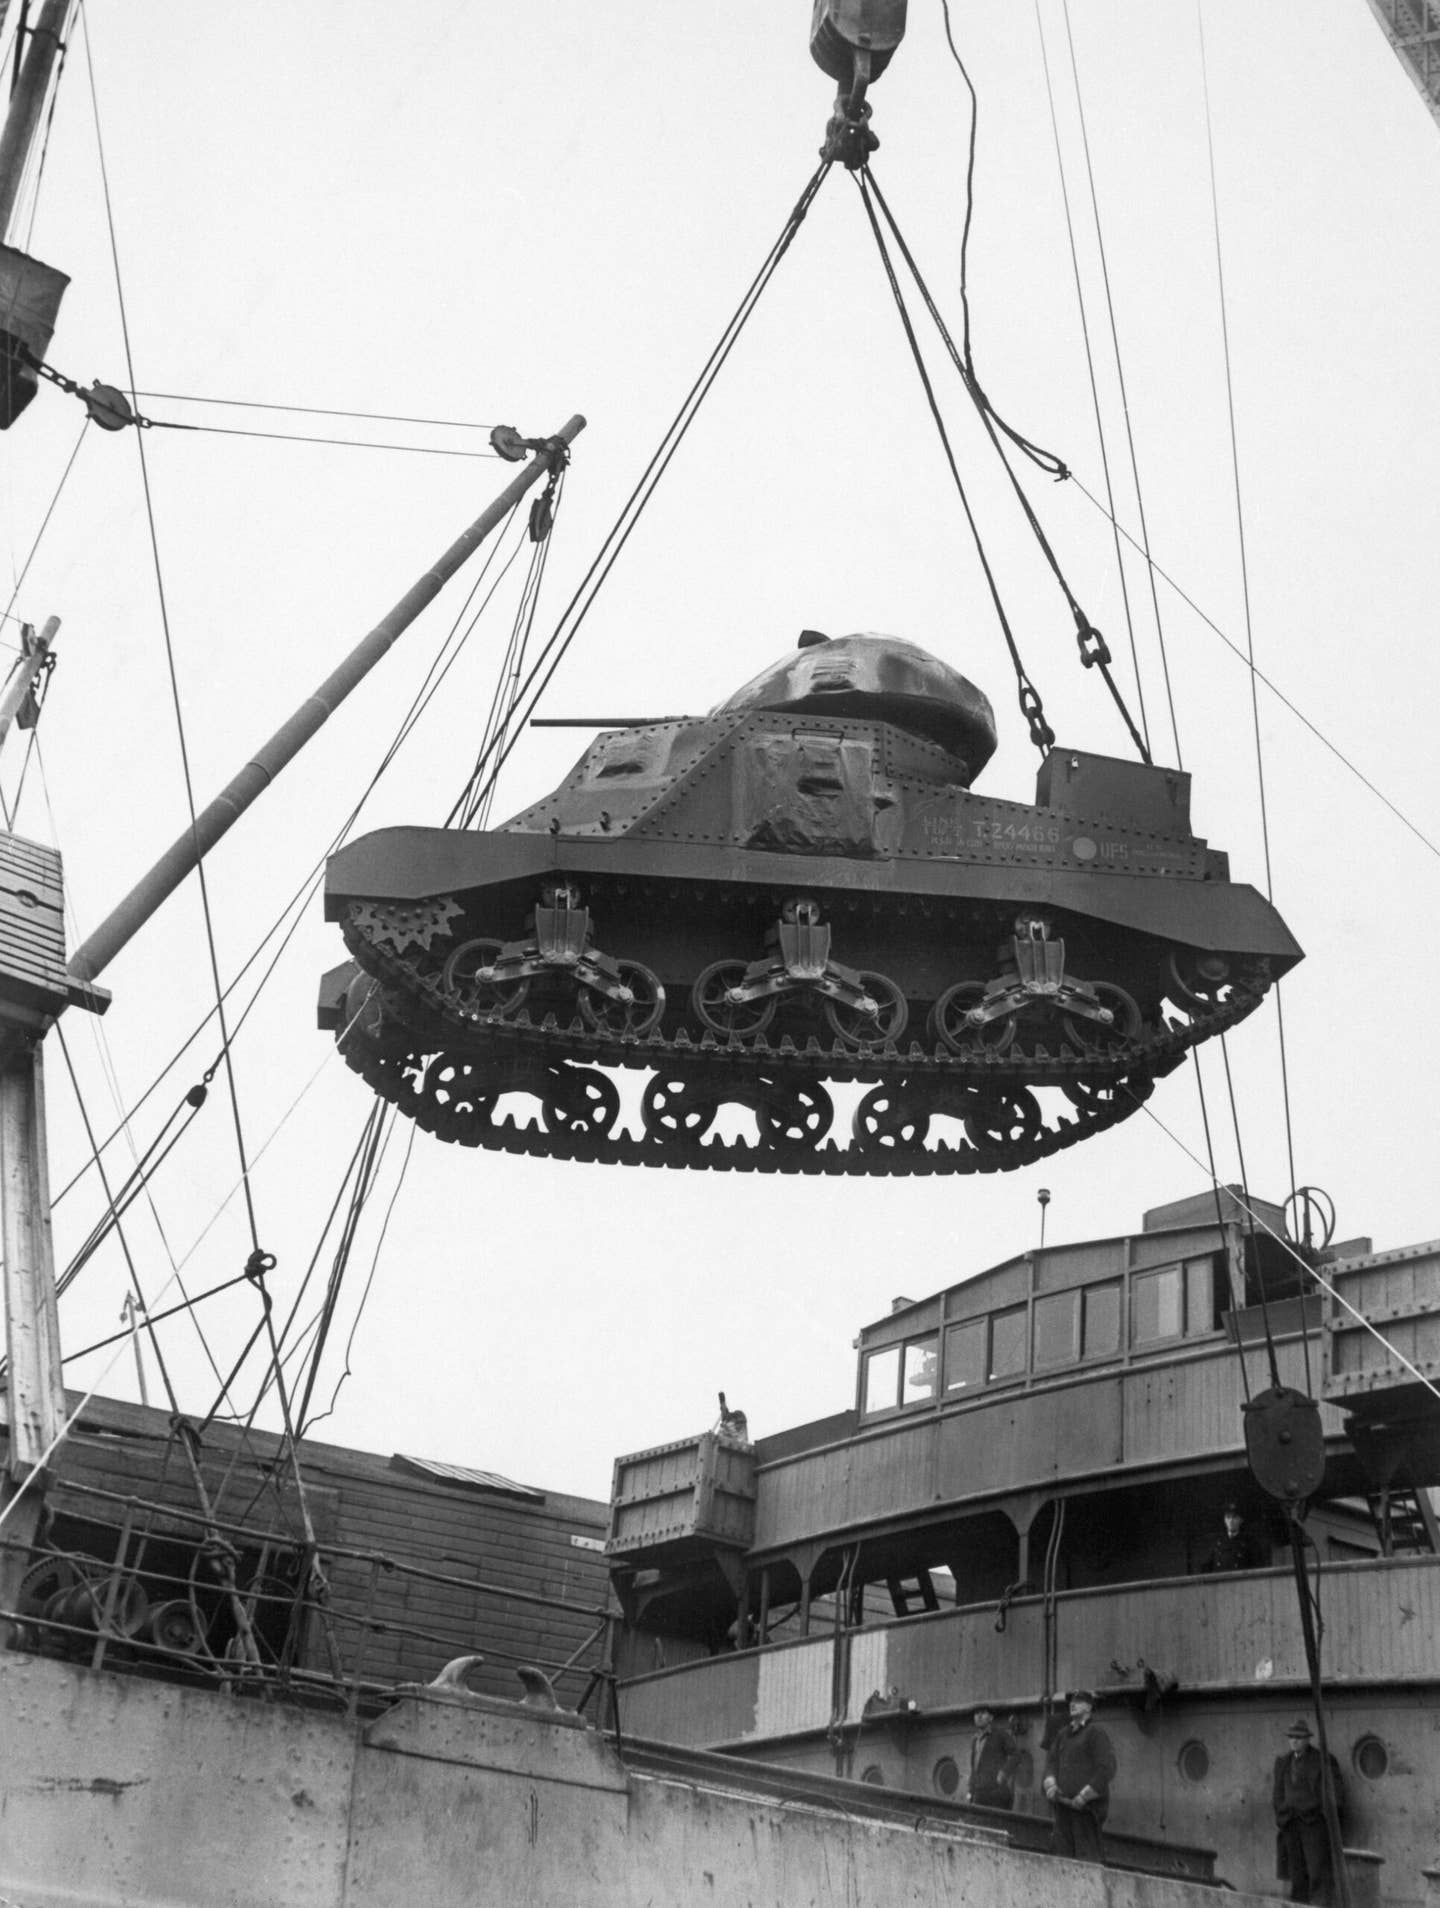 A lend-lease tank coming over the side of a cargo ship in a U.S. Atlantic Coast port. World War II-era photograph via Getty Images.